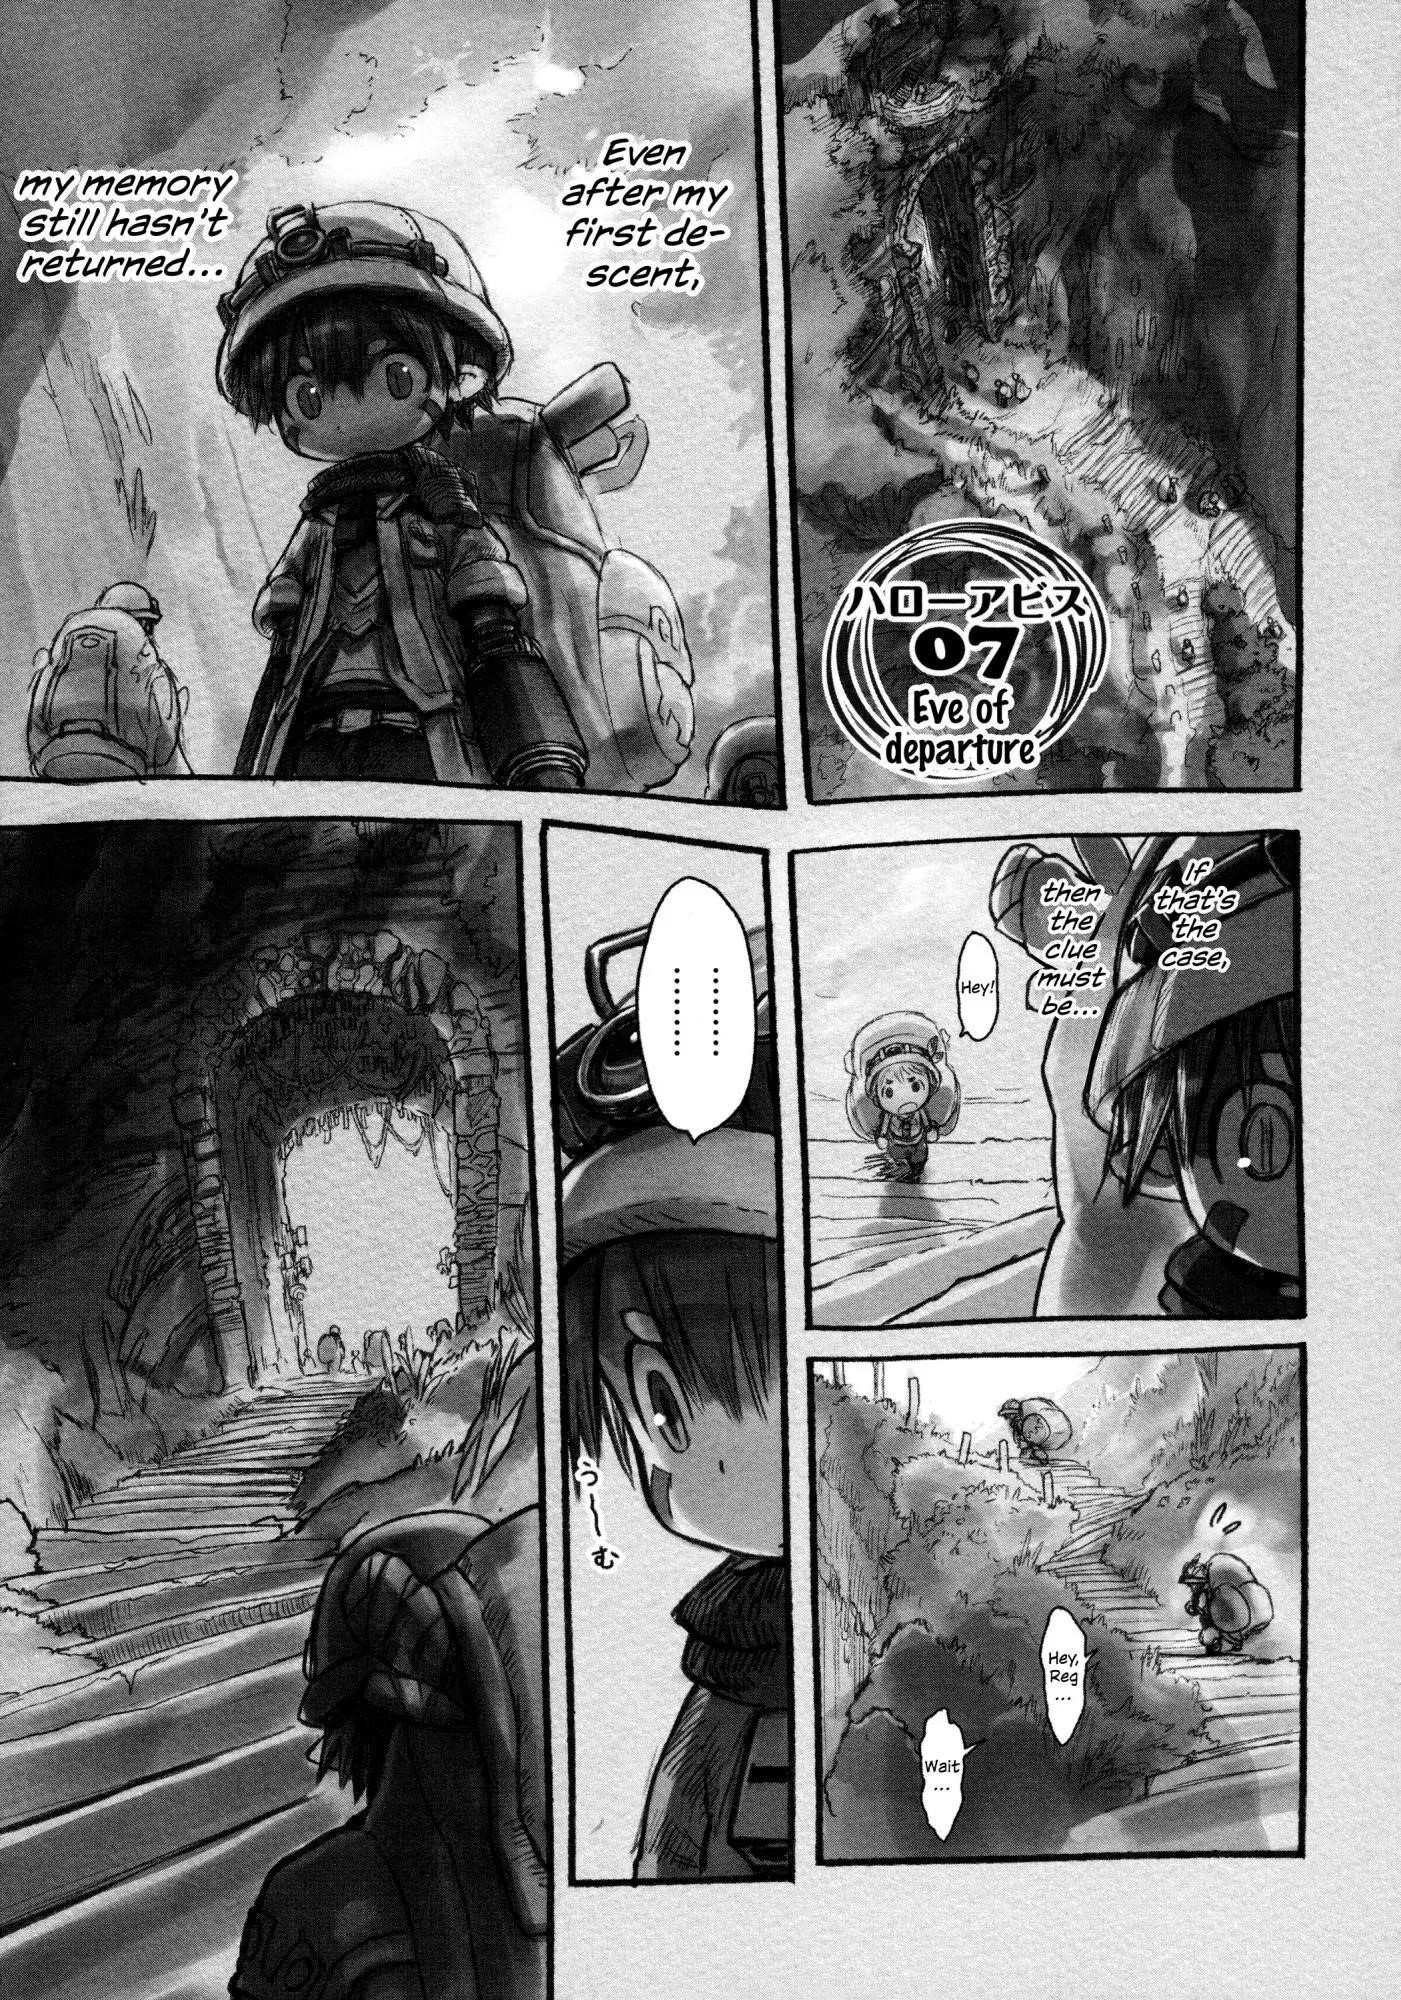 Made in Abyss, Chapter 8 - Made in Abyss Manga Online